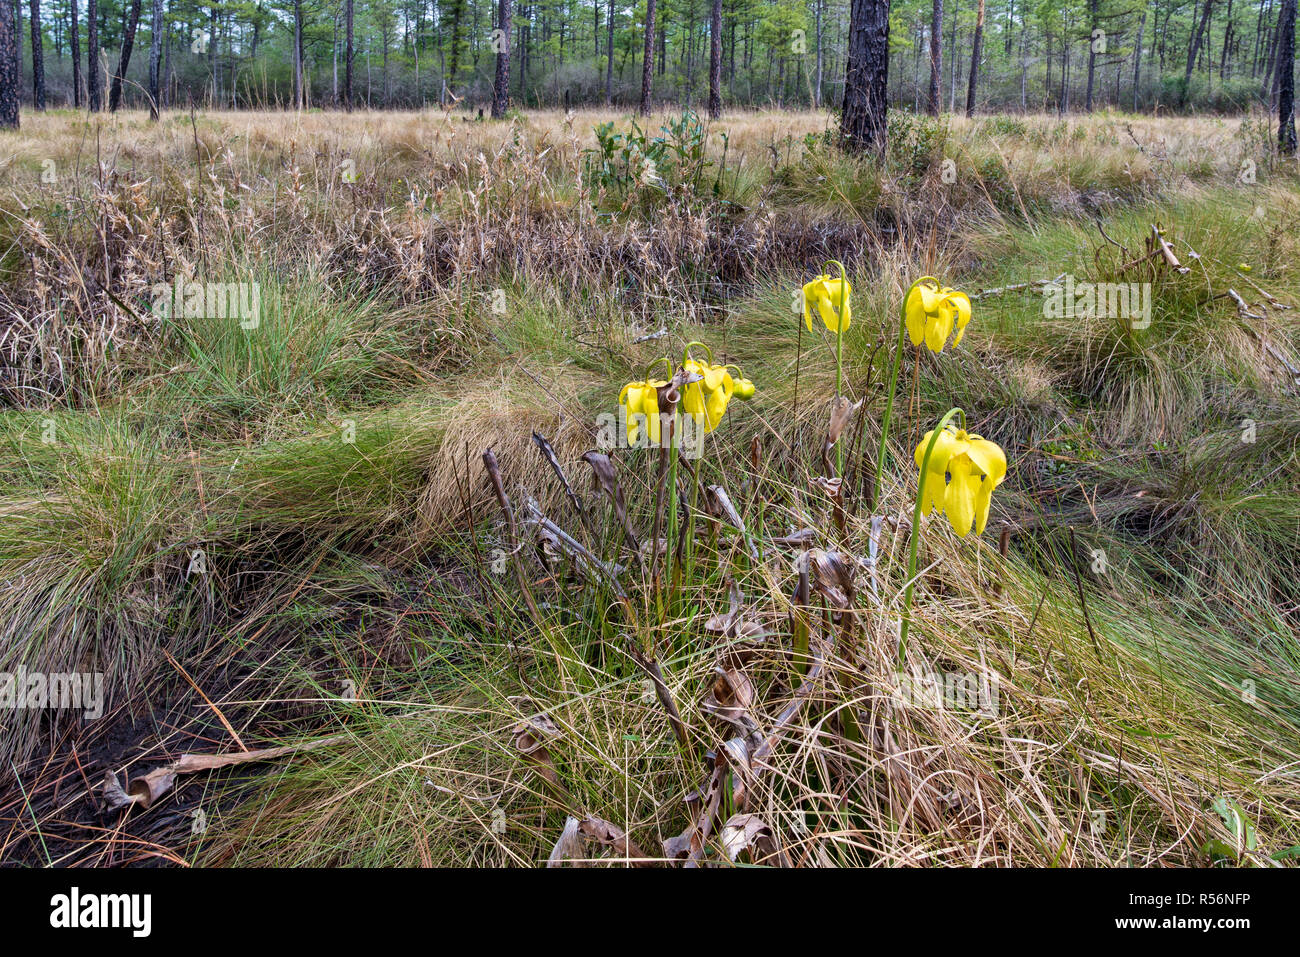 Flowers of yellow trumpet pitcher plant (Sarracenia alata) growing among wire grass (Aristida stricta) in early spring in the Nature Conservancy's Gre Stock Photo